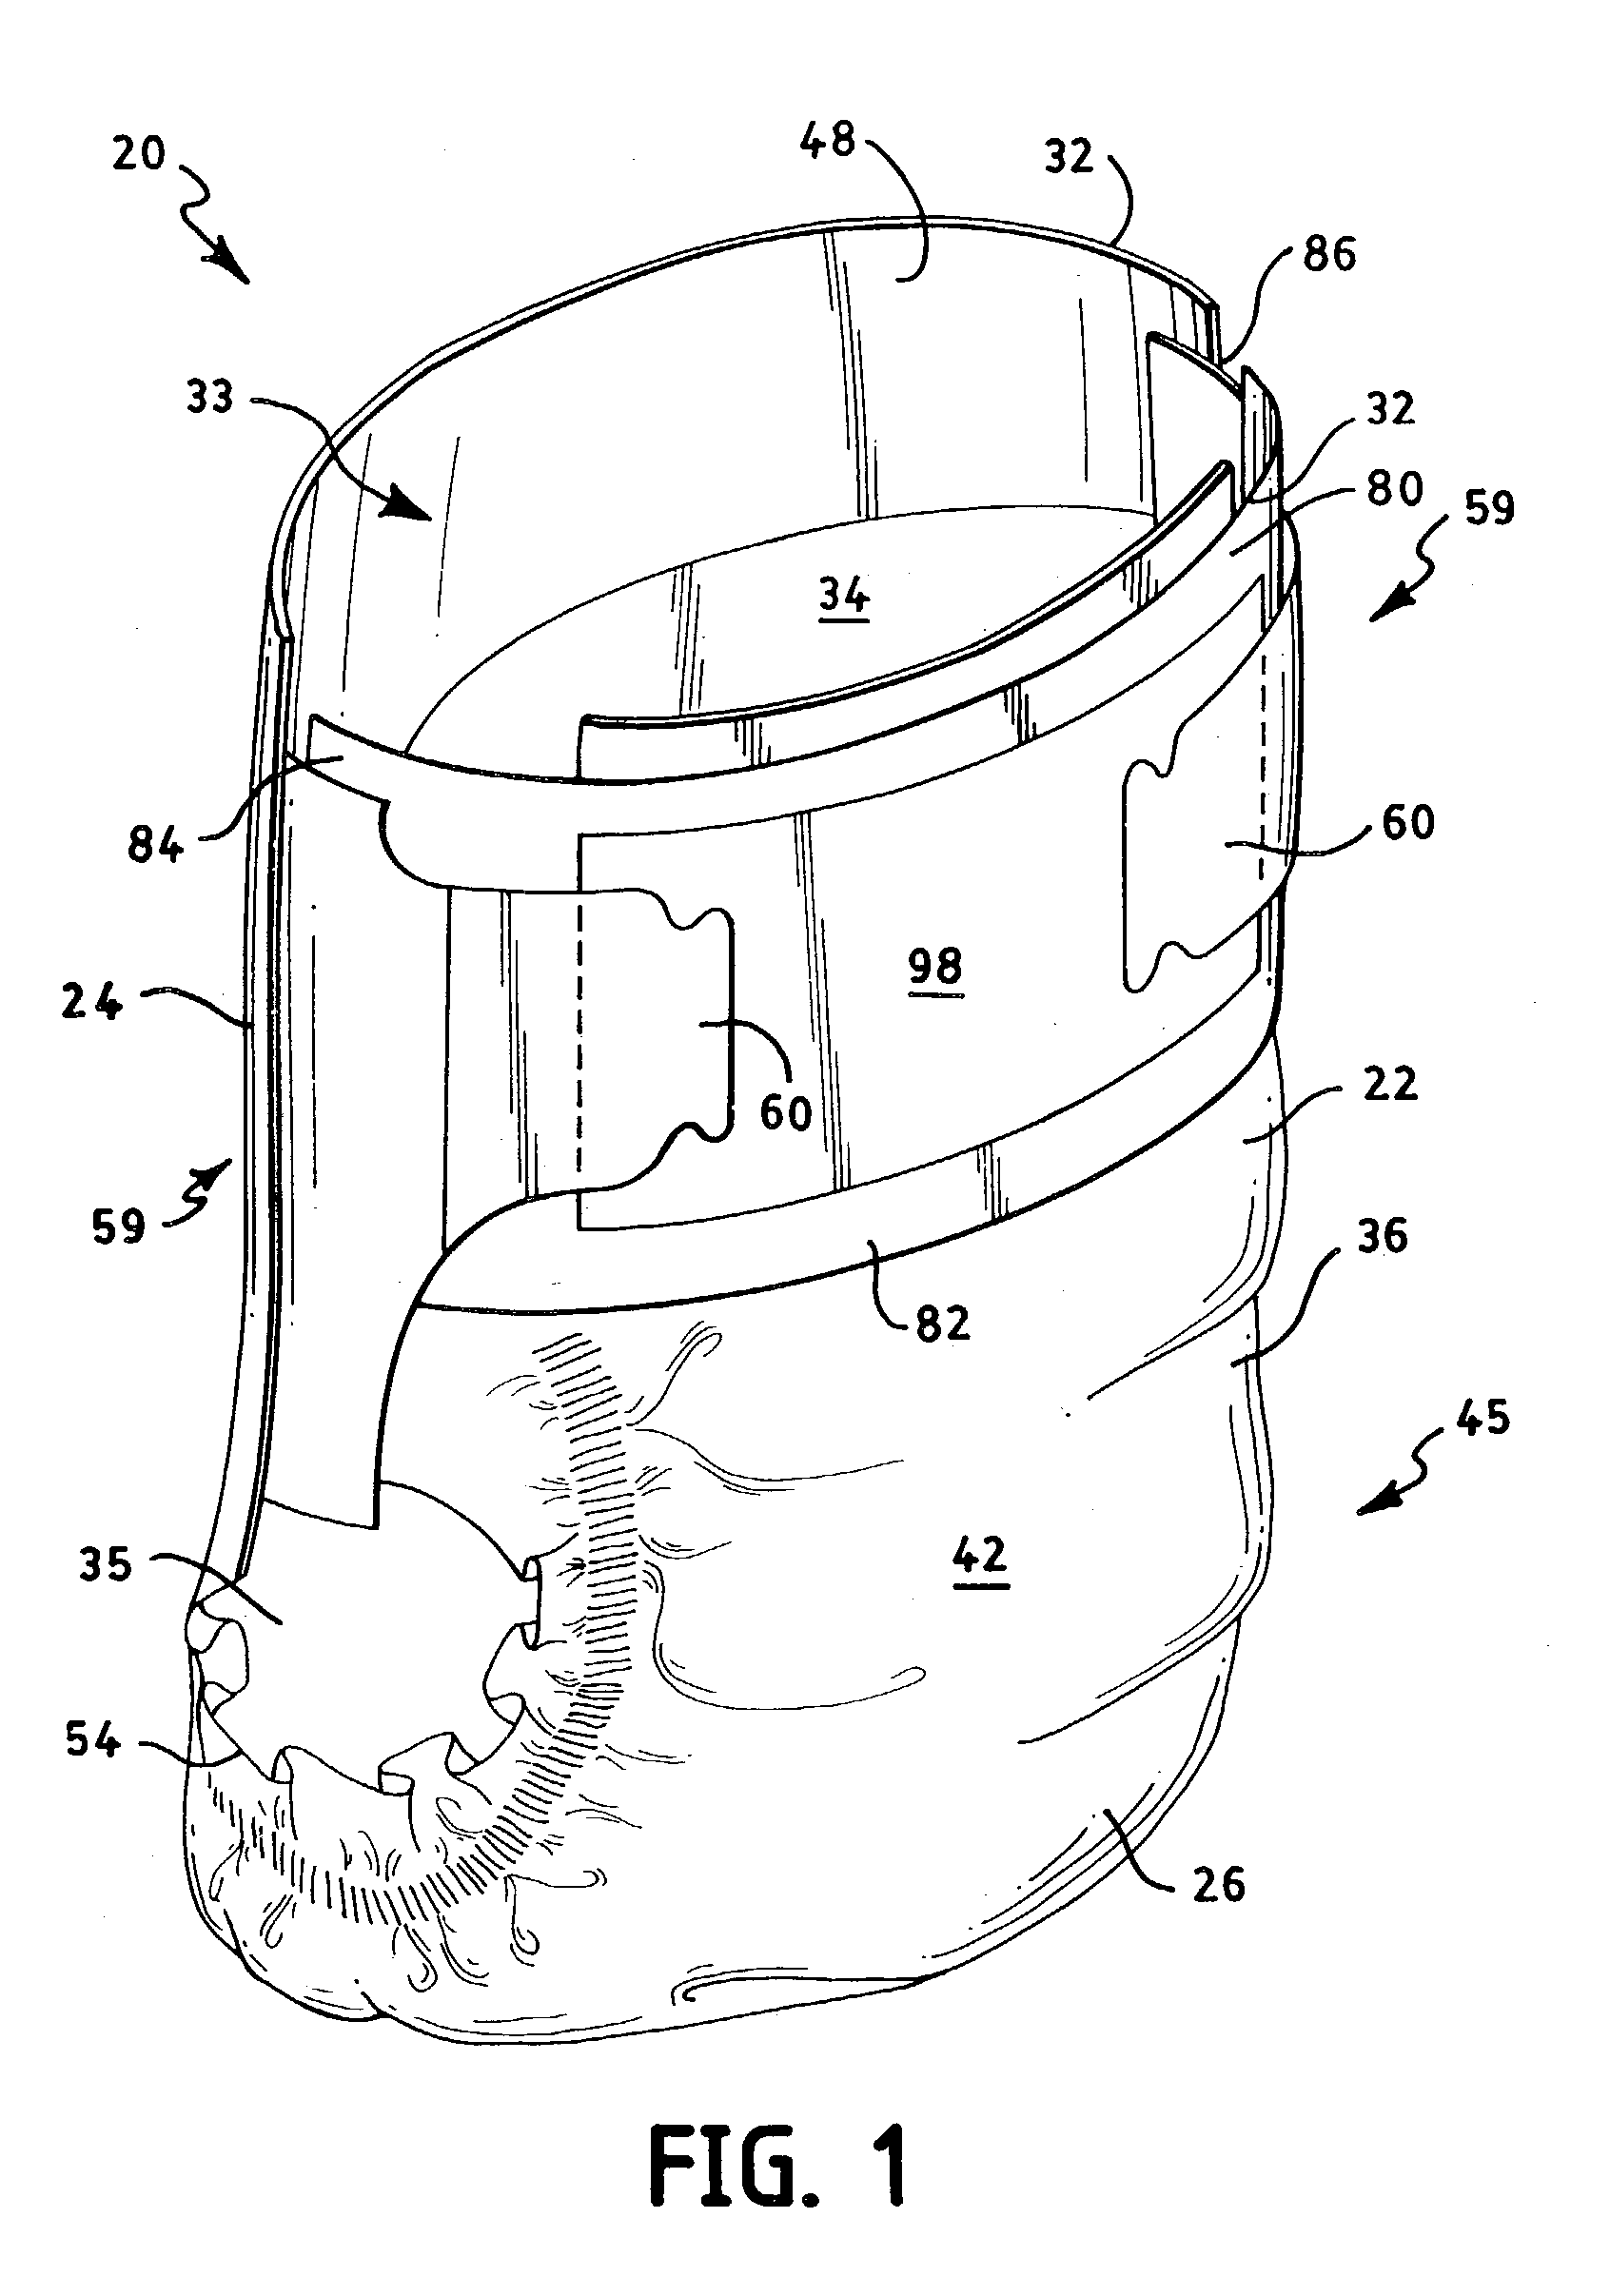 Attachment assembly for absorbent article